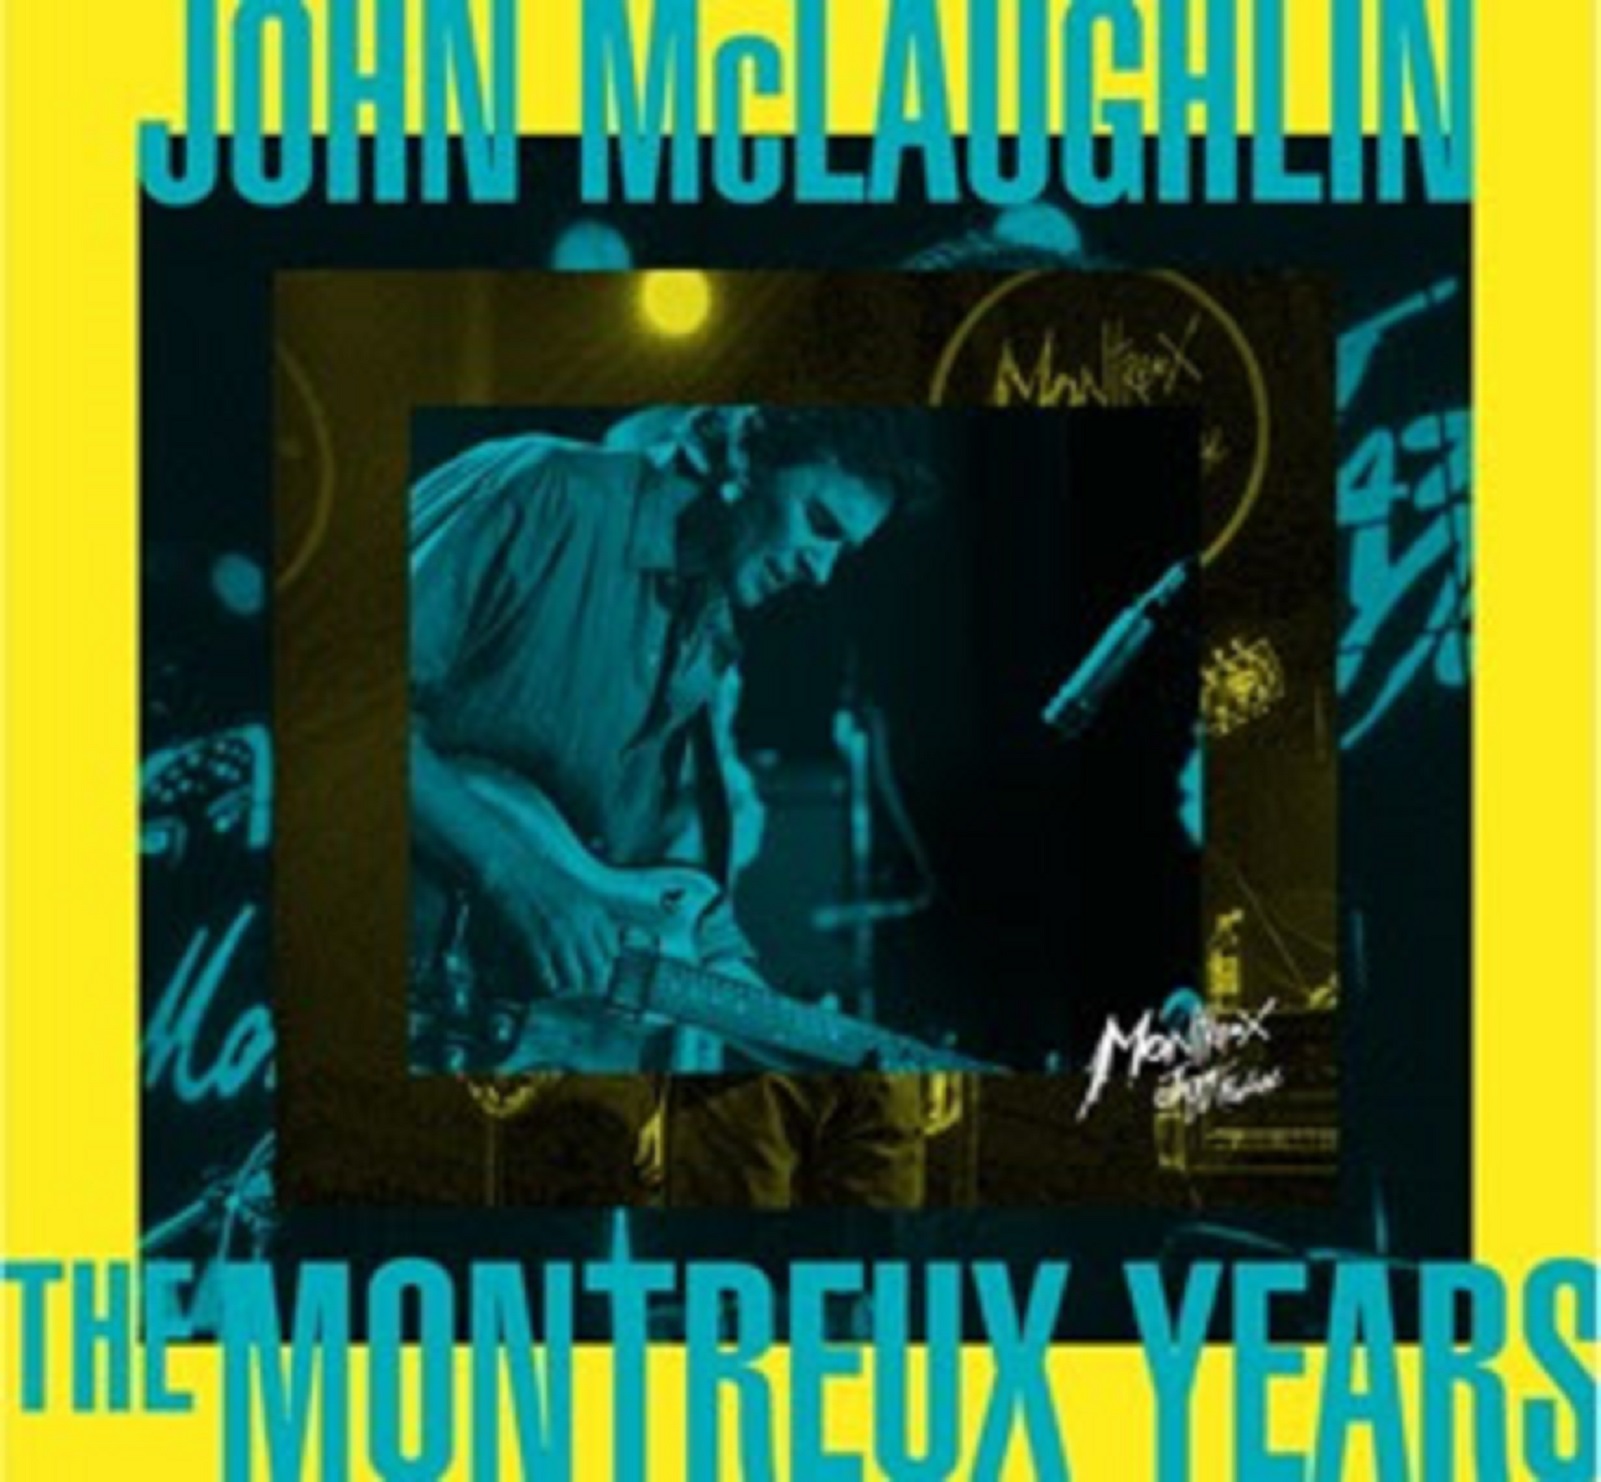 “John McLaughlin: The Montreux Years” Set for Release on March 4, 2022